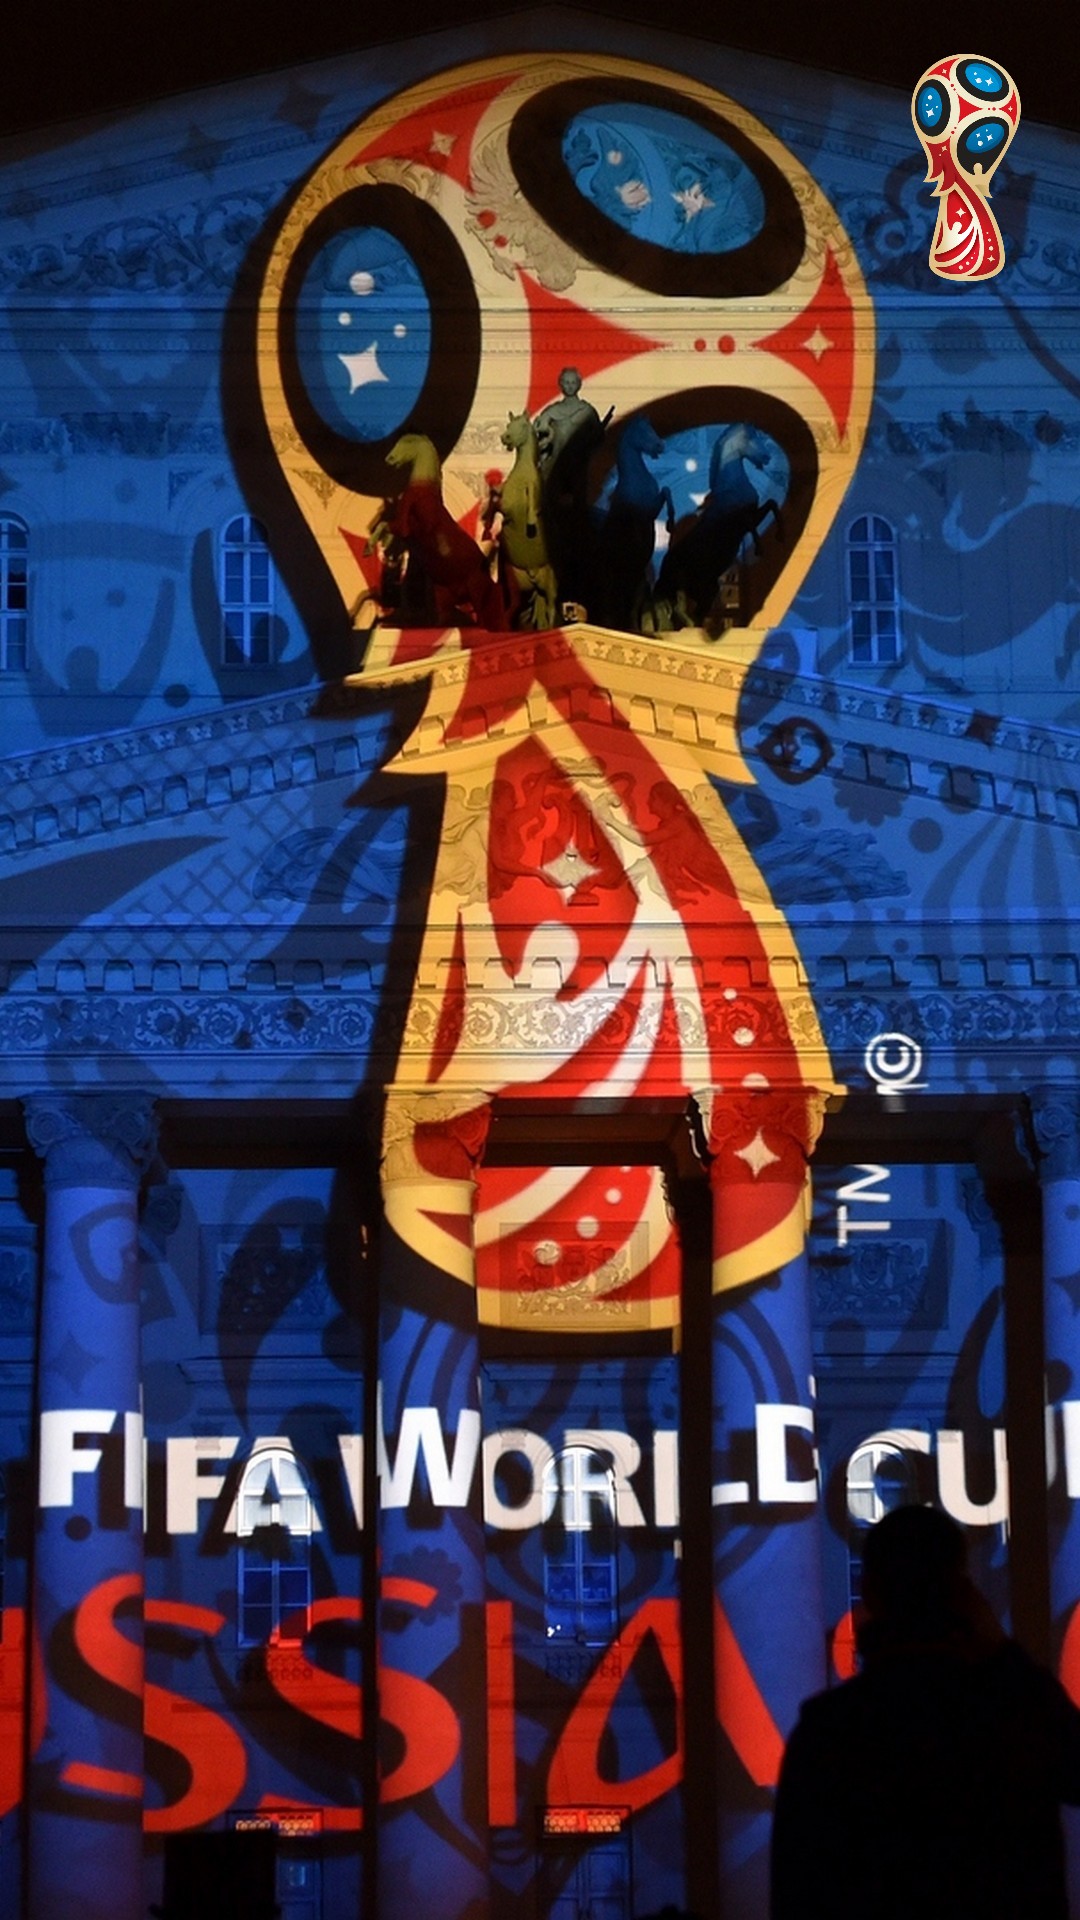 FIFA World Cup HD Wallpaper For iPhone With Resolution 1080X1920 pixel. You can make this wallpaper for your Mac or Windows Desktop Background, iPhone, Android or Tablet and another Smartphone device for free